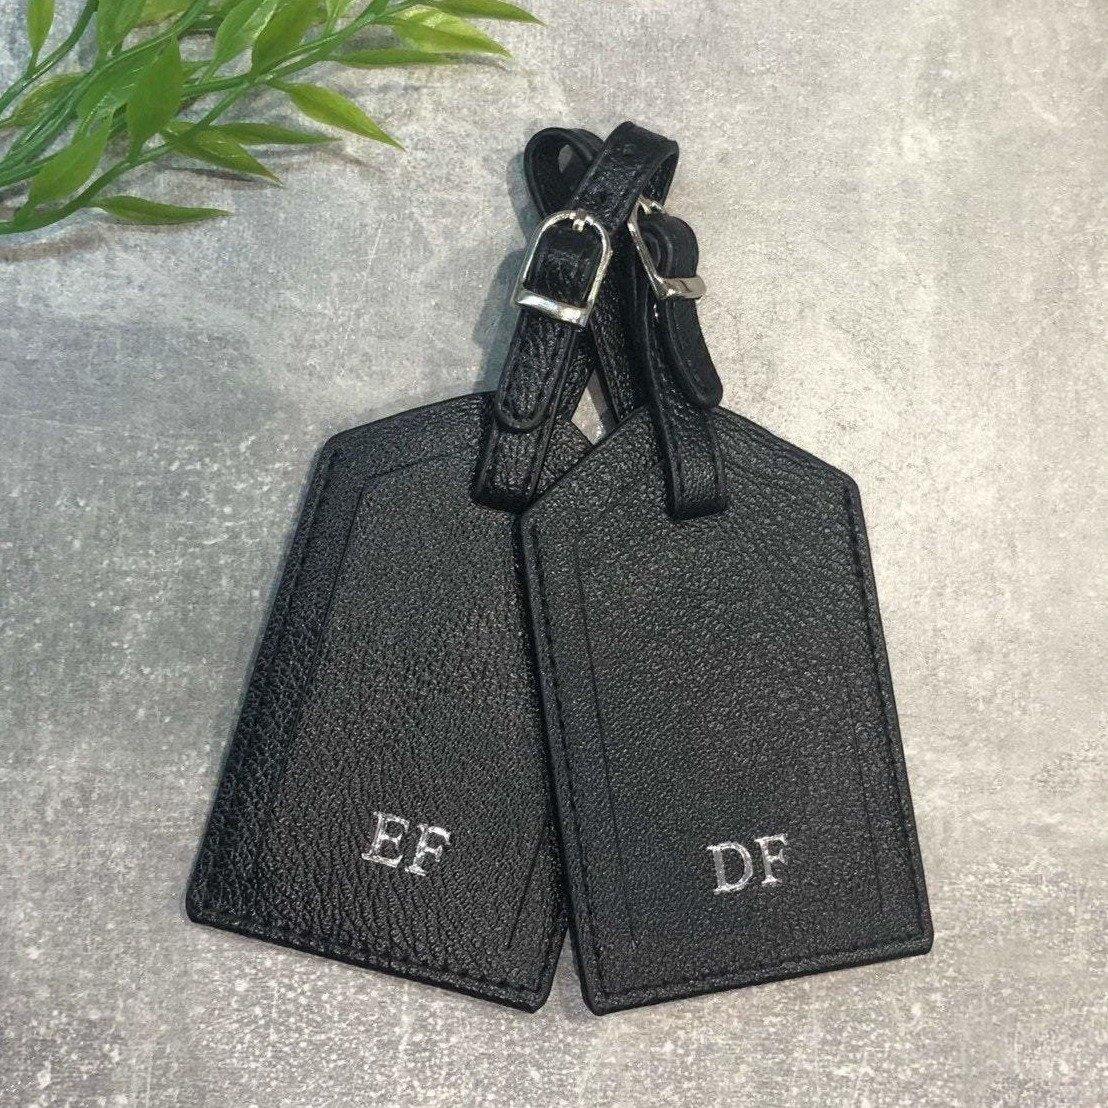 Personalised pu leather luggage tags | wedding gift | travel tags | travel accessories - PersonalisebyLisa